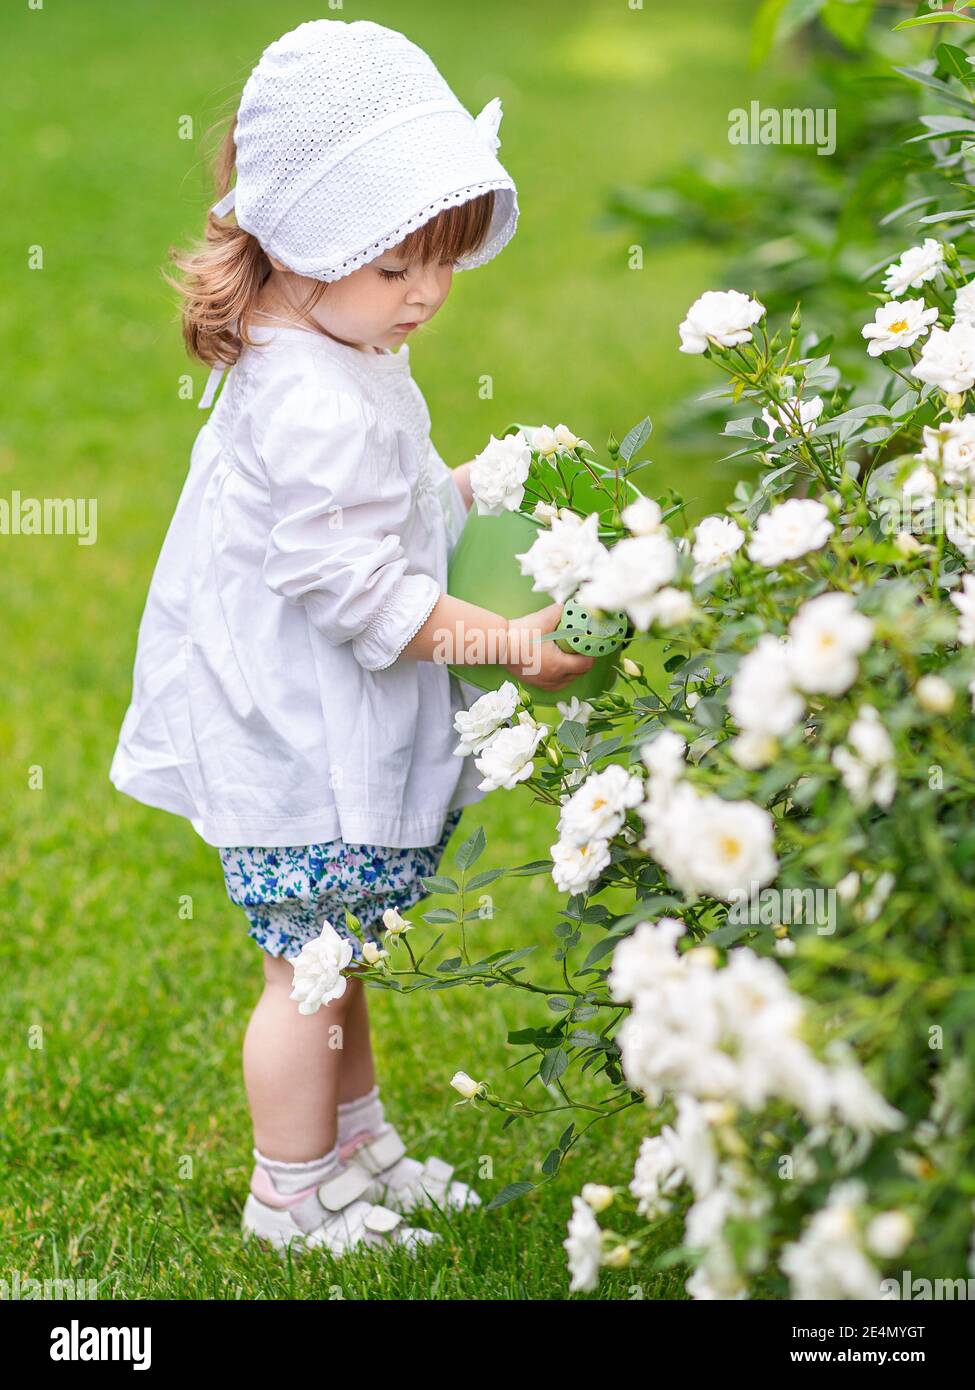 on a summer day, a little girl takes care of flowers in the garden, watering roses in a flower bed Stock Photo